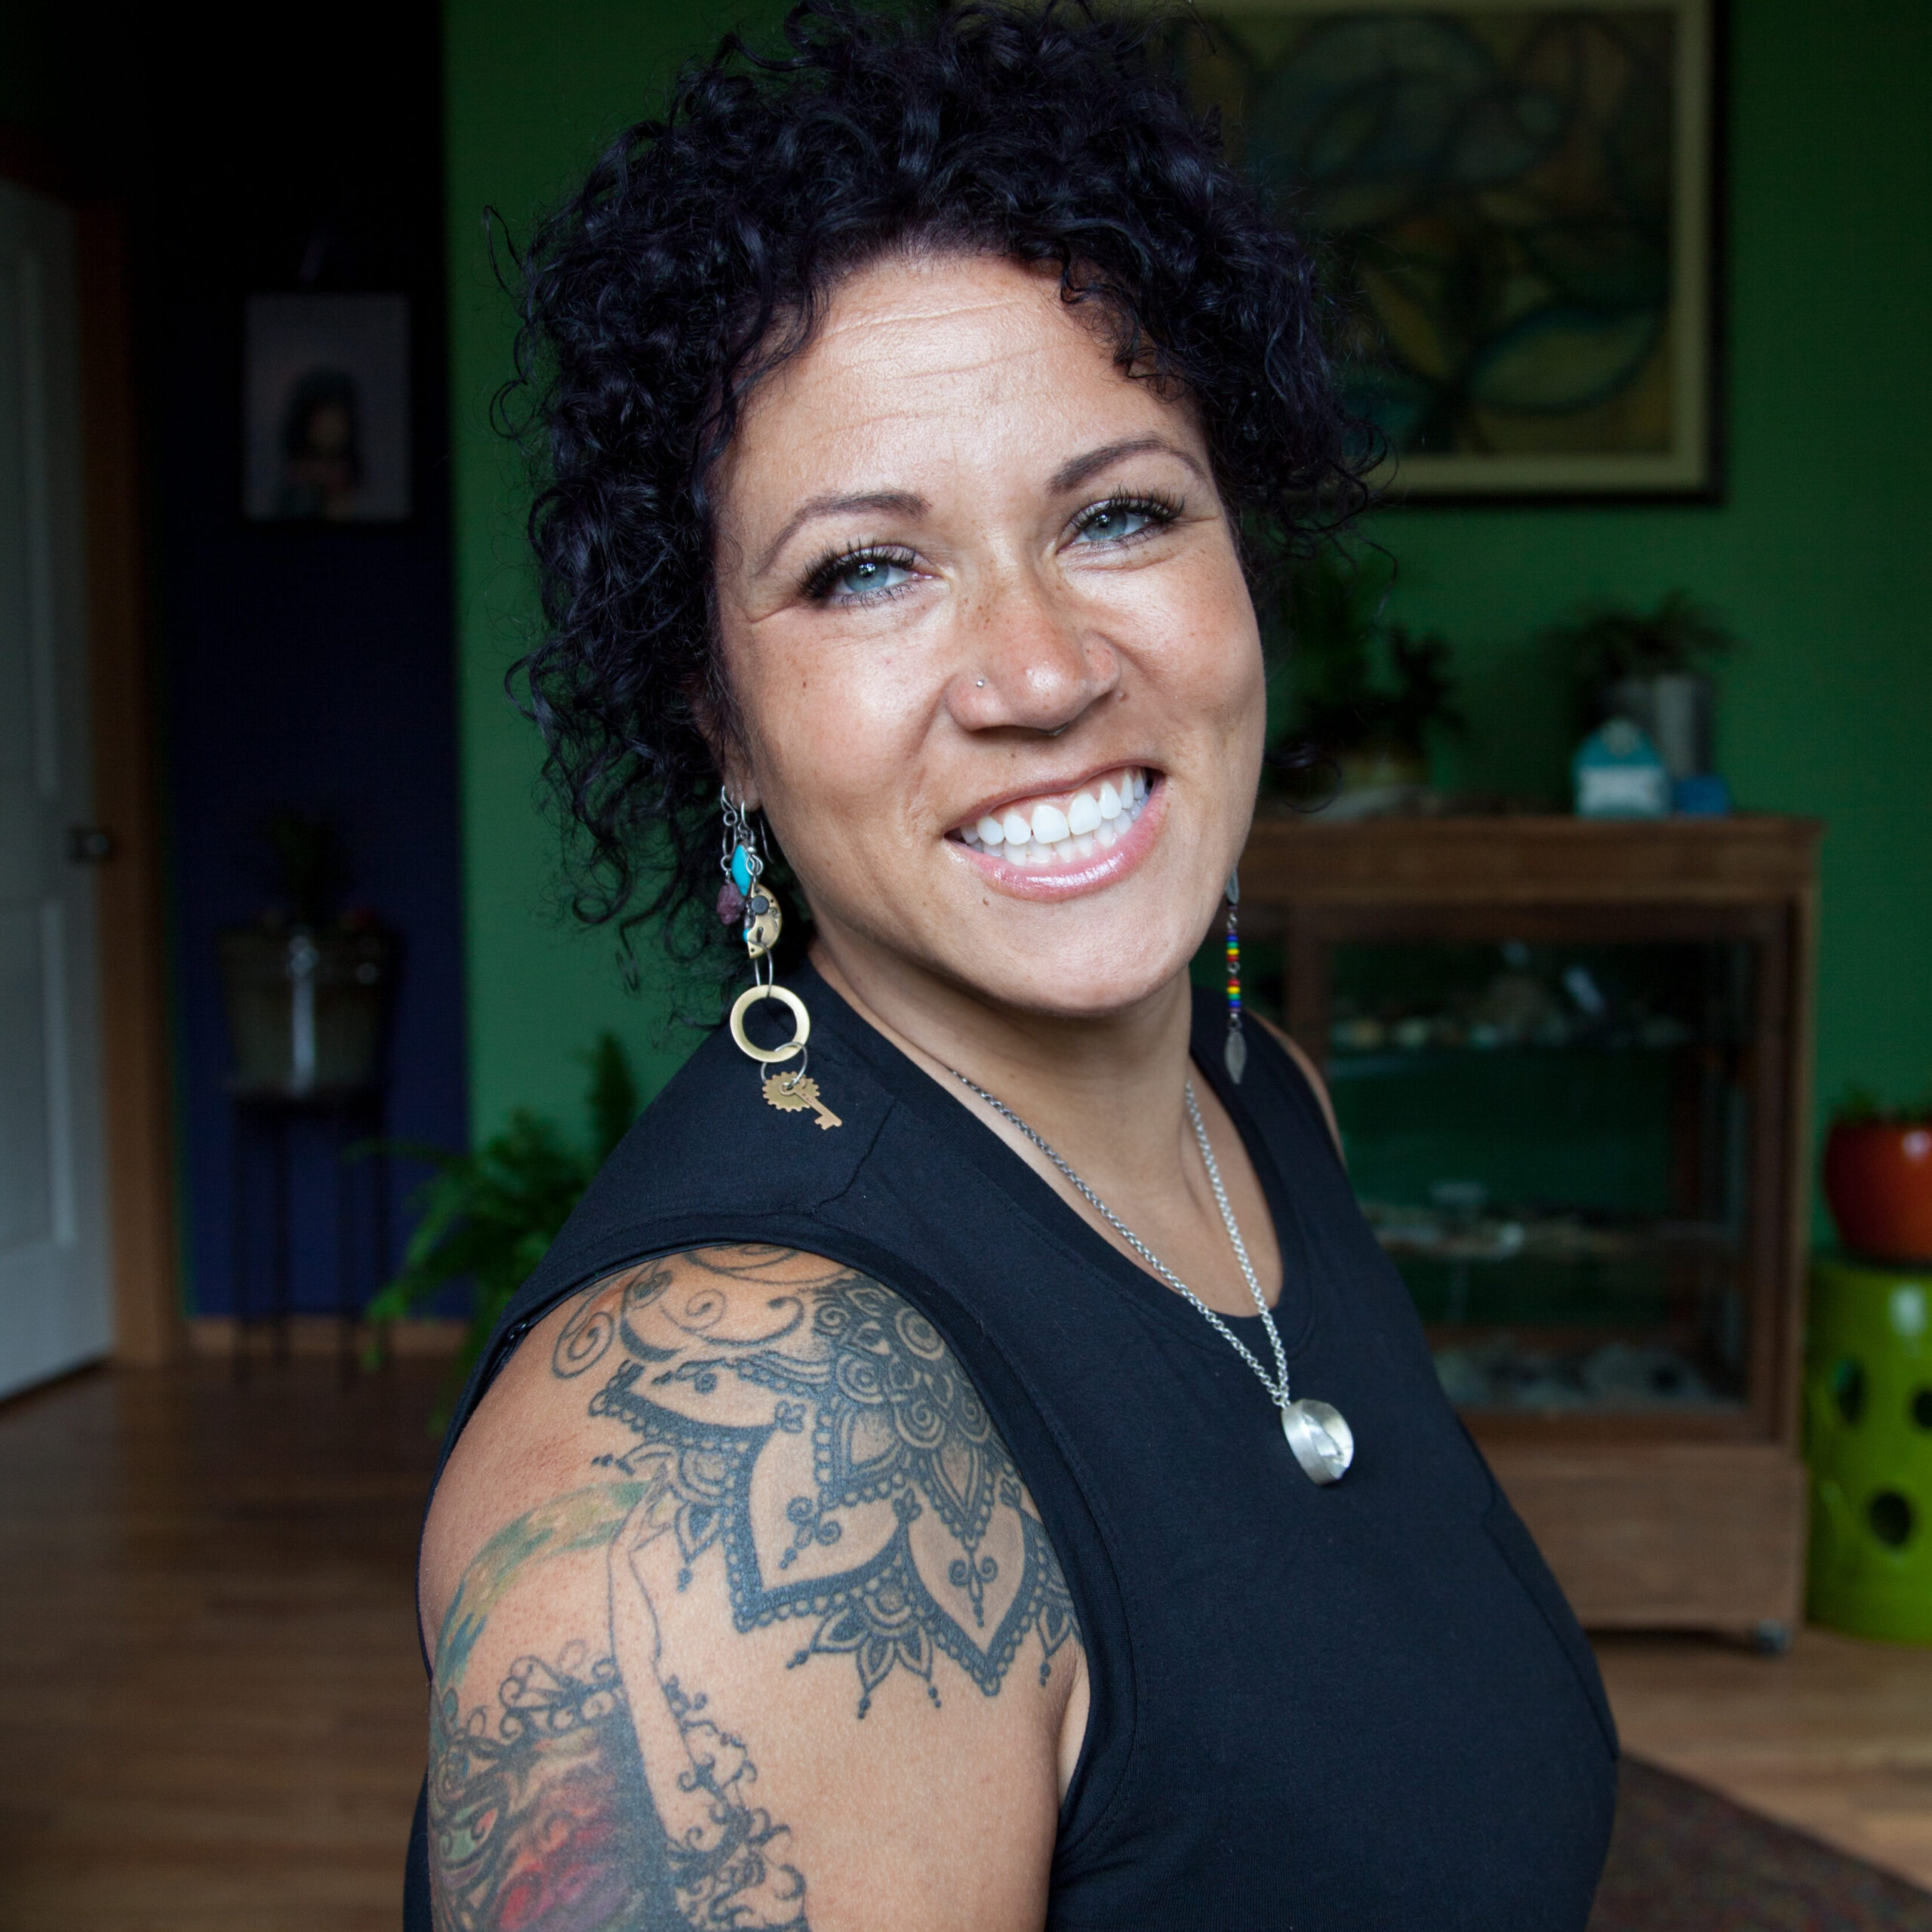 photo of a Black woman sitting in her living room. She has long curly hair and a tattooed shoulder and bicep. She is smiling at the camera.